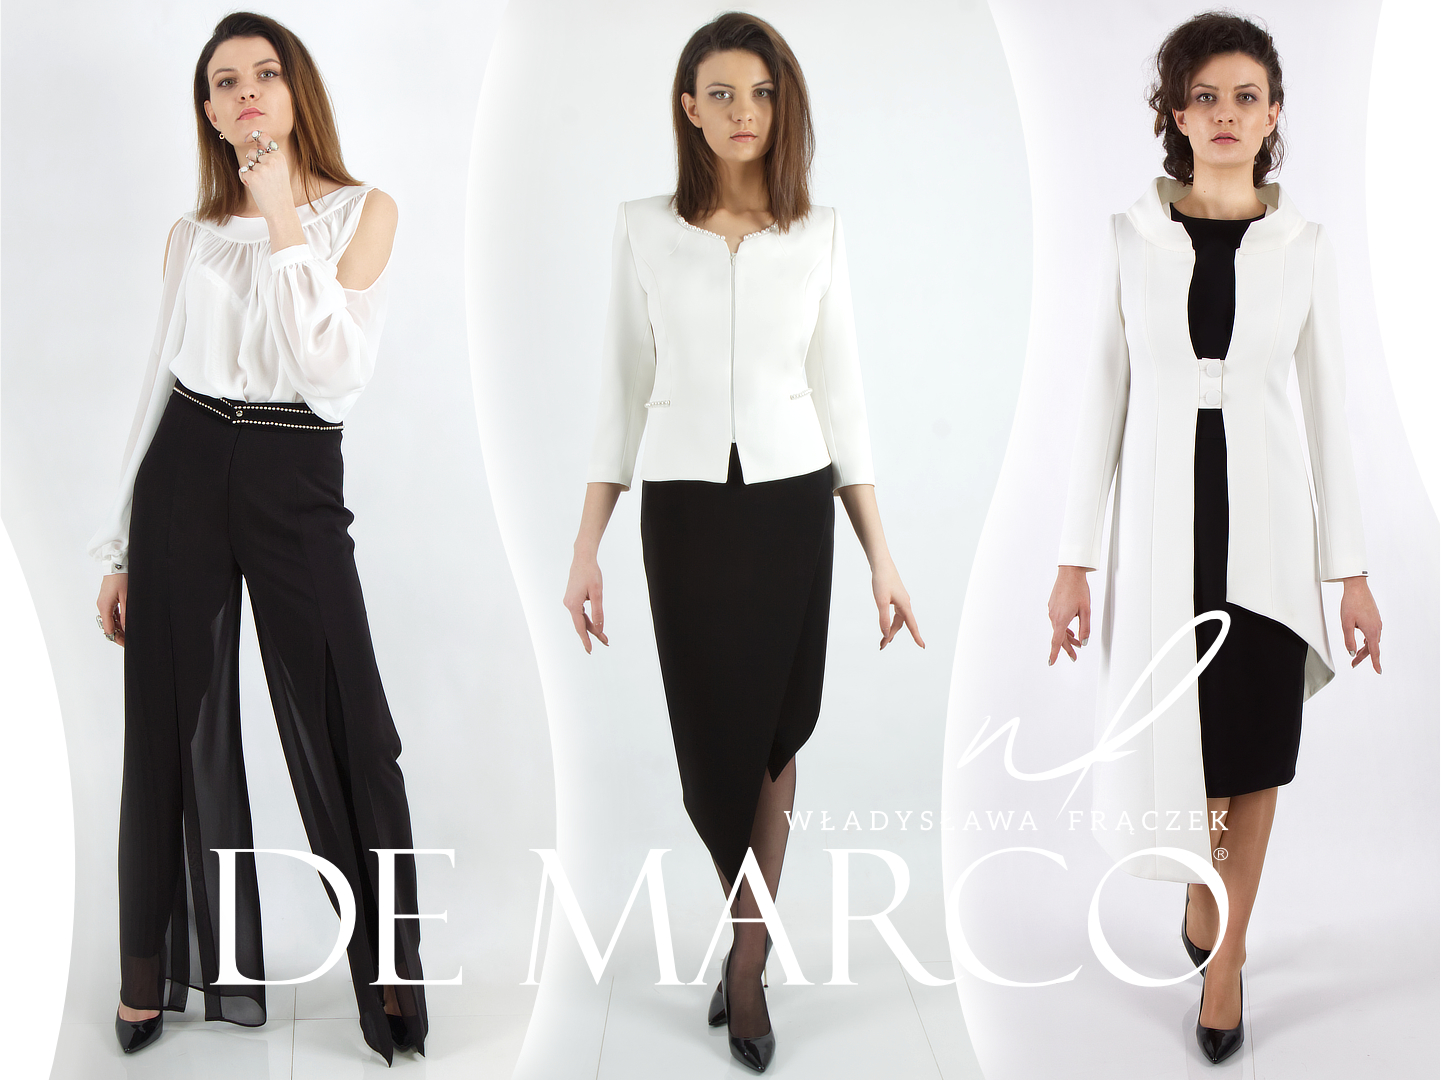 What’s trending? Black and white formal and business styles from De Marco